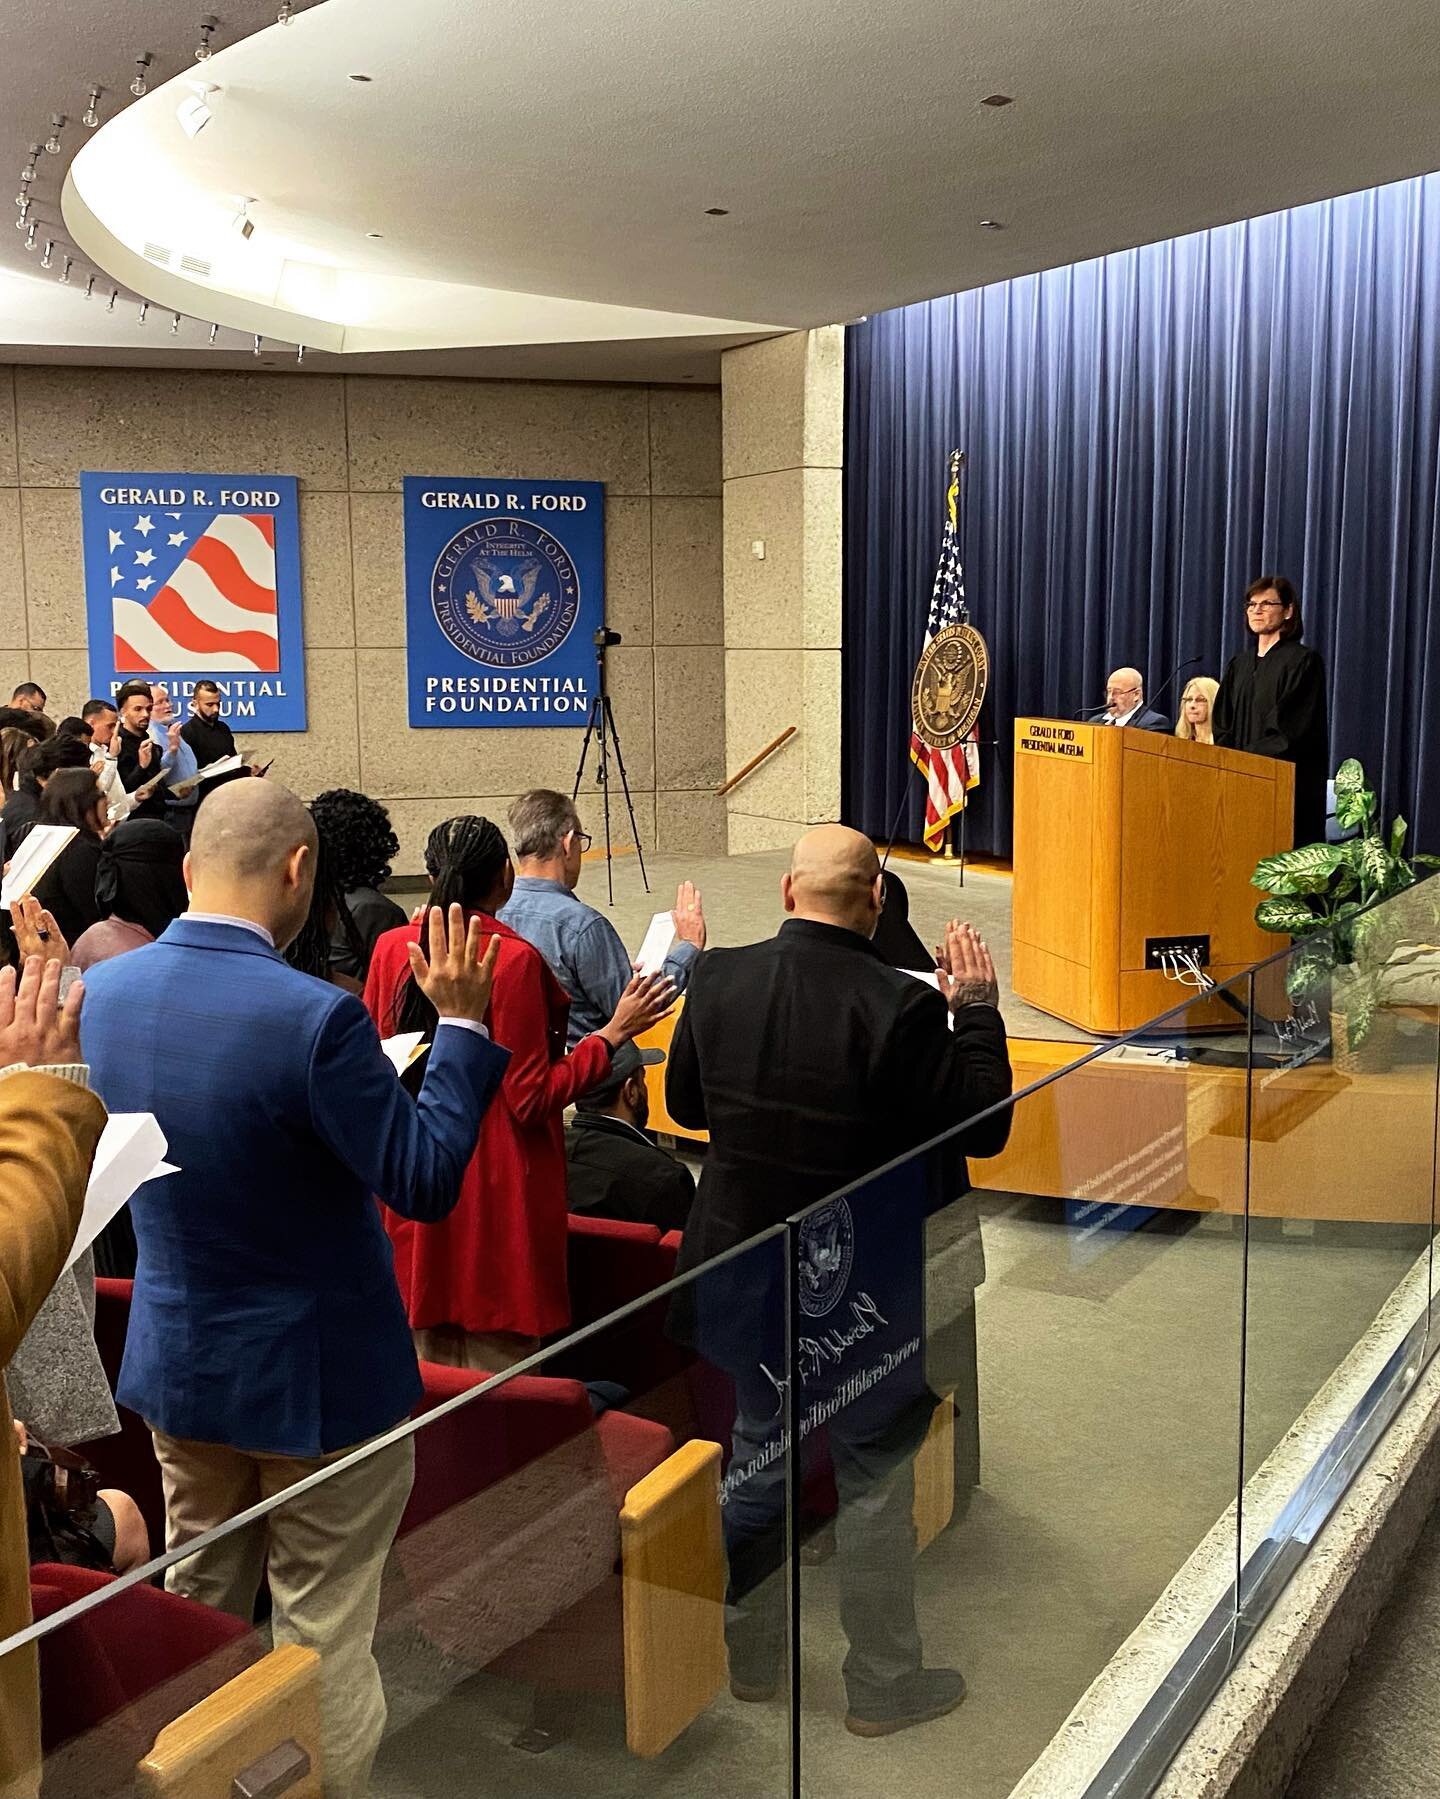 Congratulations to the 155 new Americans who took the Oath of Allegiance today! We are so grateful to be able to celebrate with you! #todaysdar